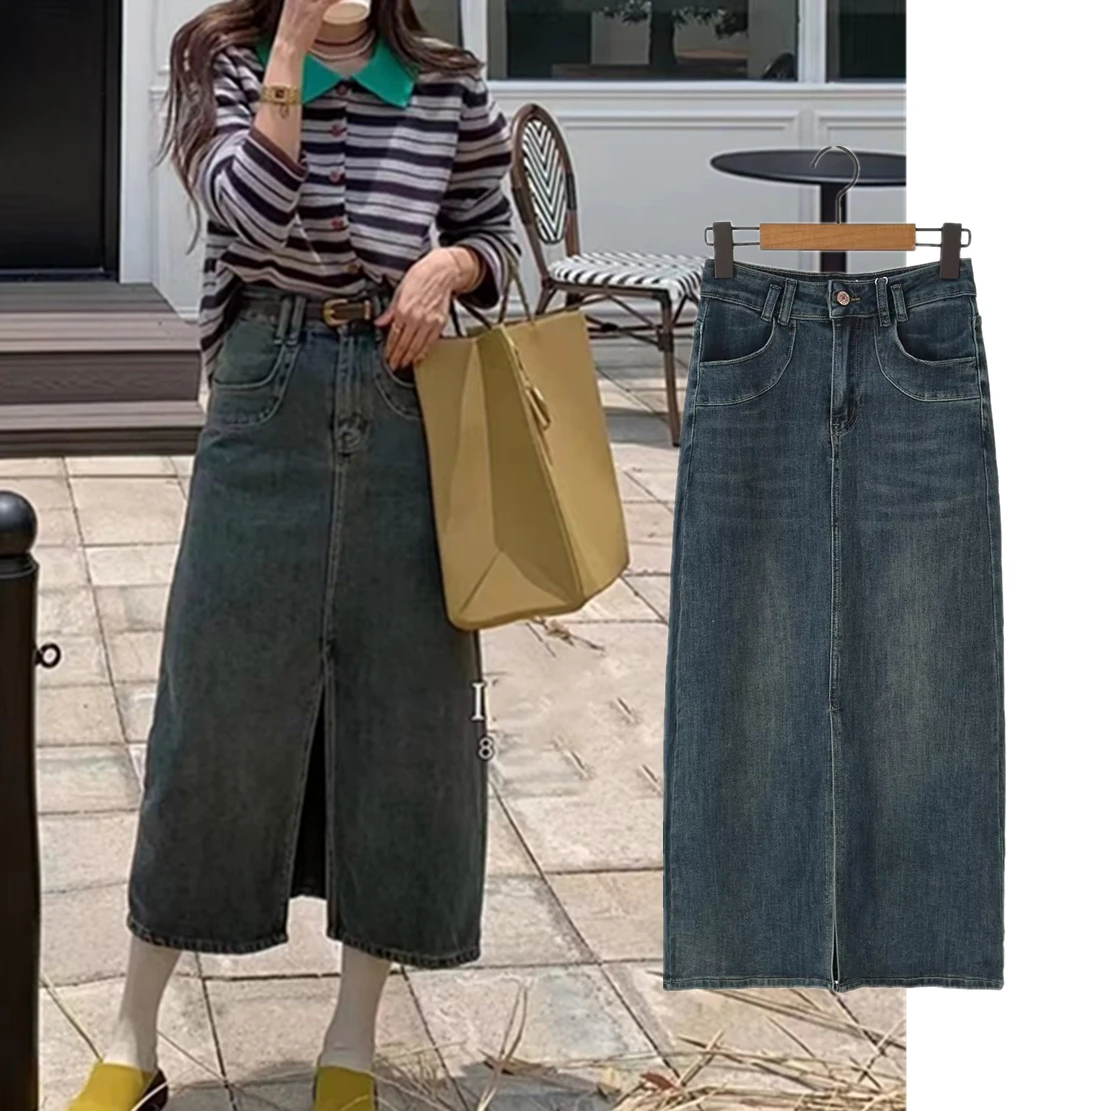 Withered Ins Fashion Blogger High Street Slit Denim Skirt High Waist Retro Washed Old Straight Midi Skirt Female hip hop dragged jeans washed and old spring and fall new high street retro wide leg skirt pants y2k streetwear baggy jeans women